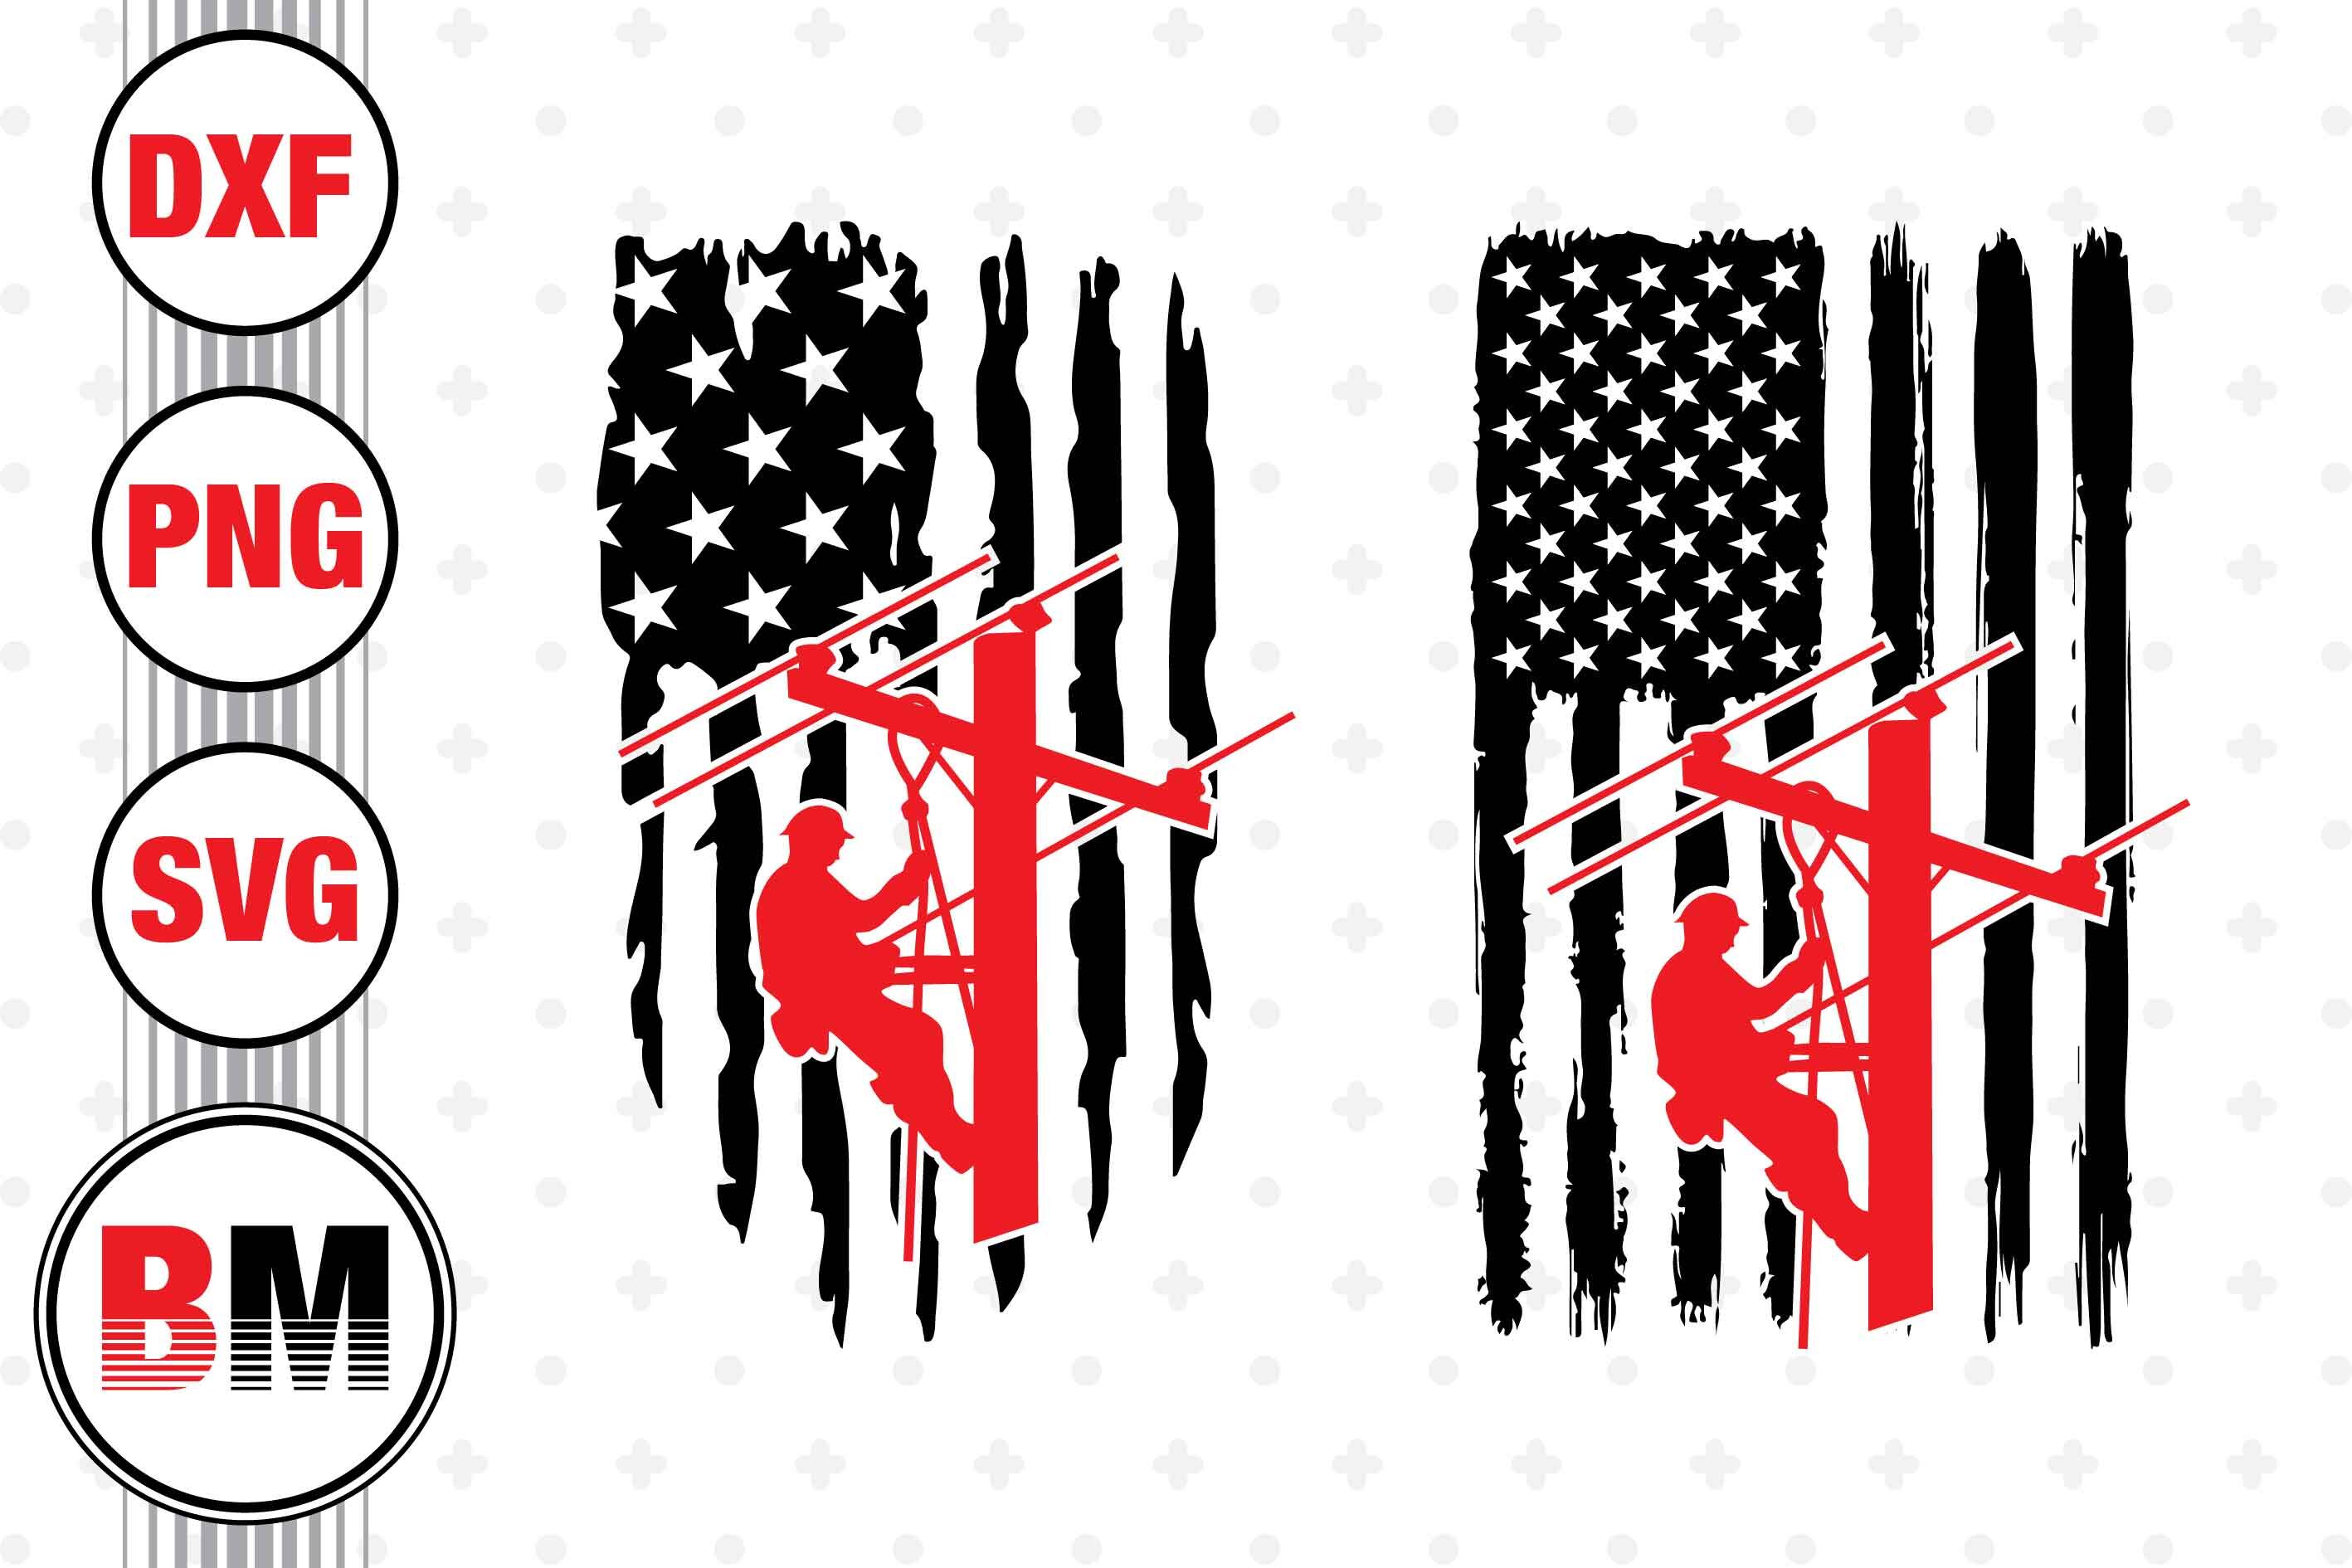 Lineman American Flag SVG, PNG, DXF Files By Bmdesign | TheHungryJPEG